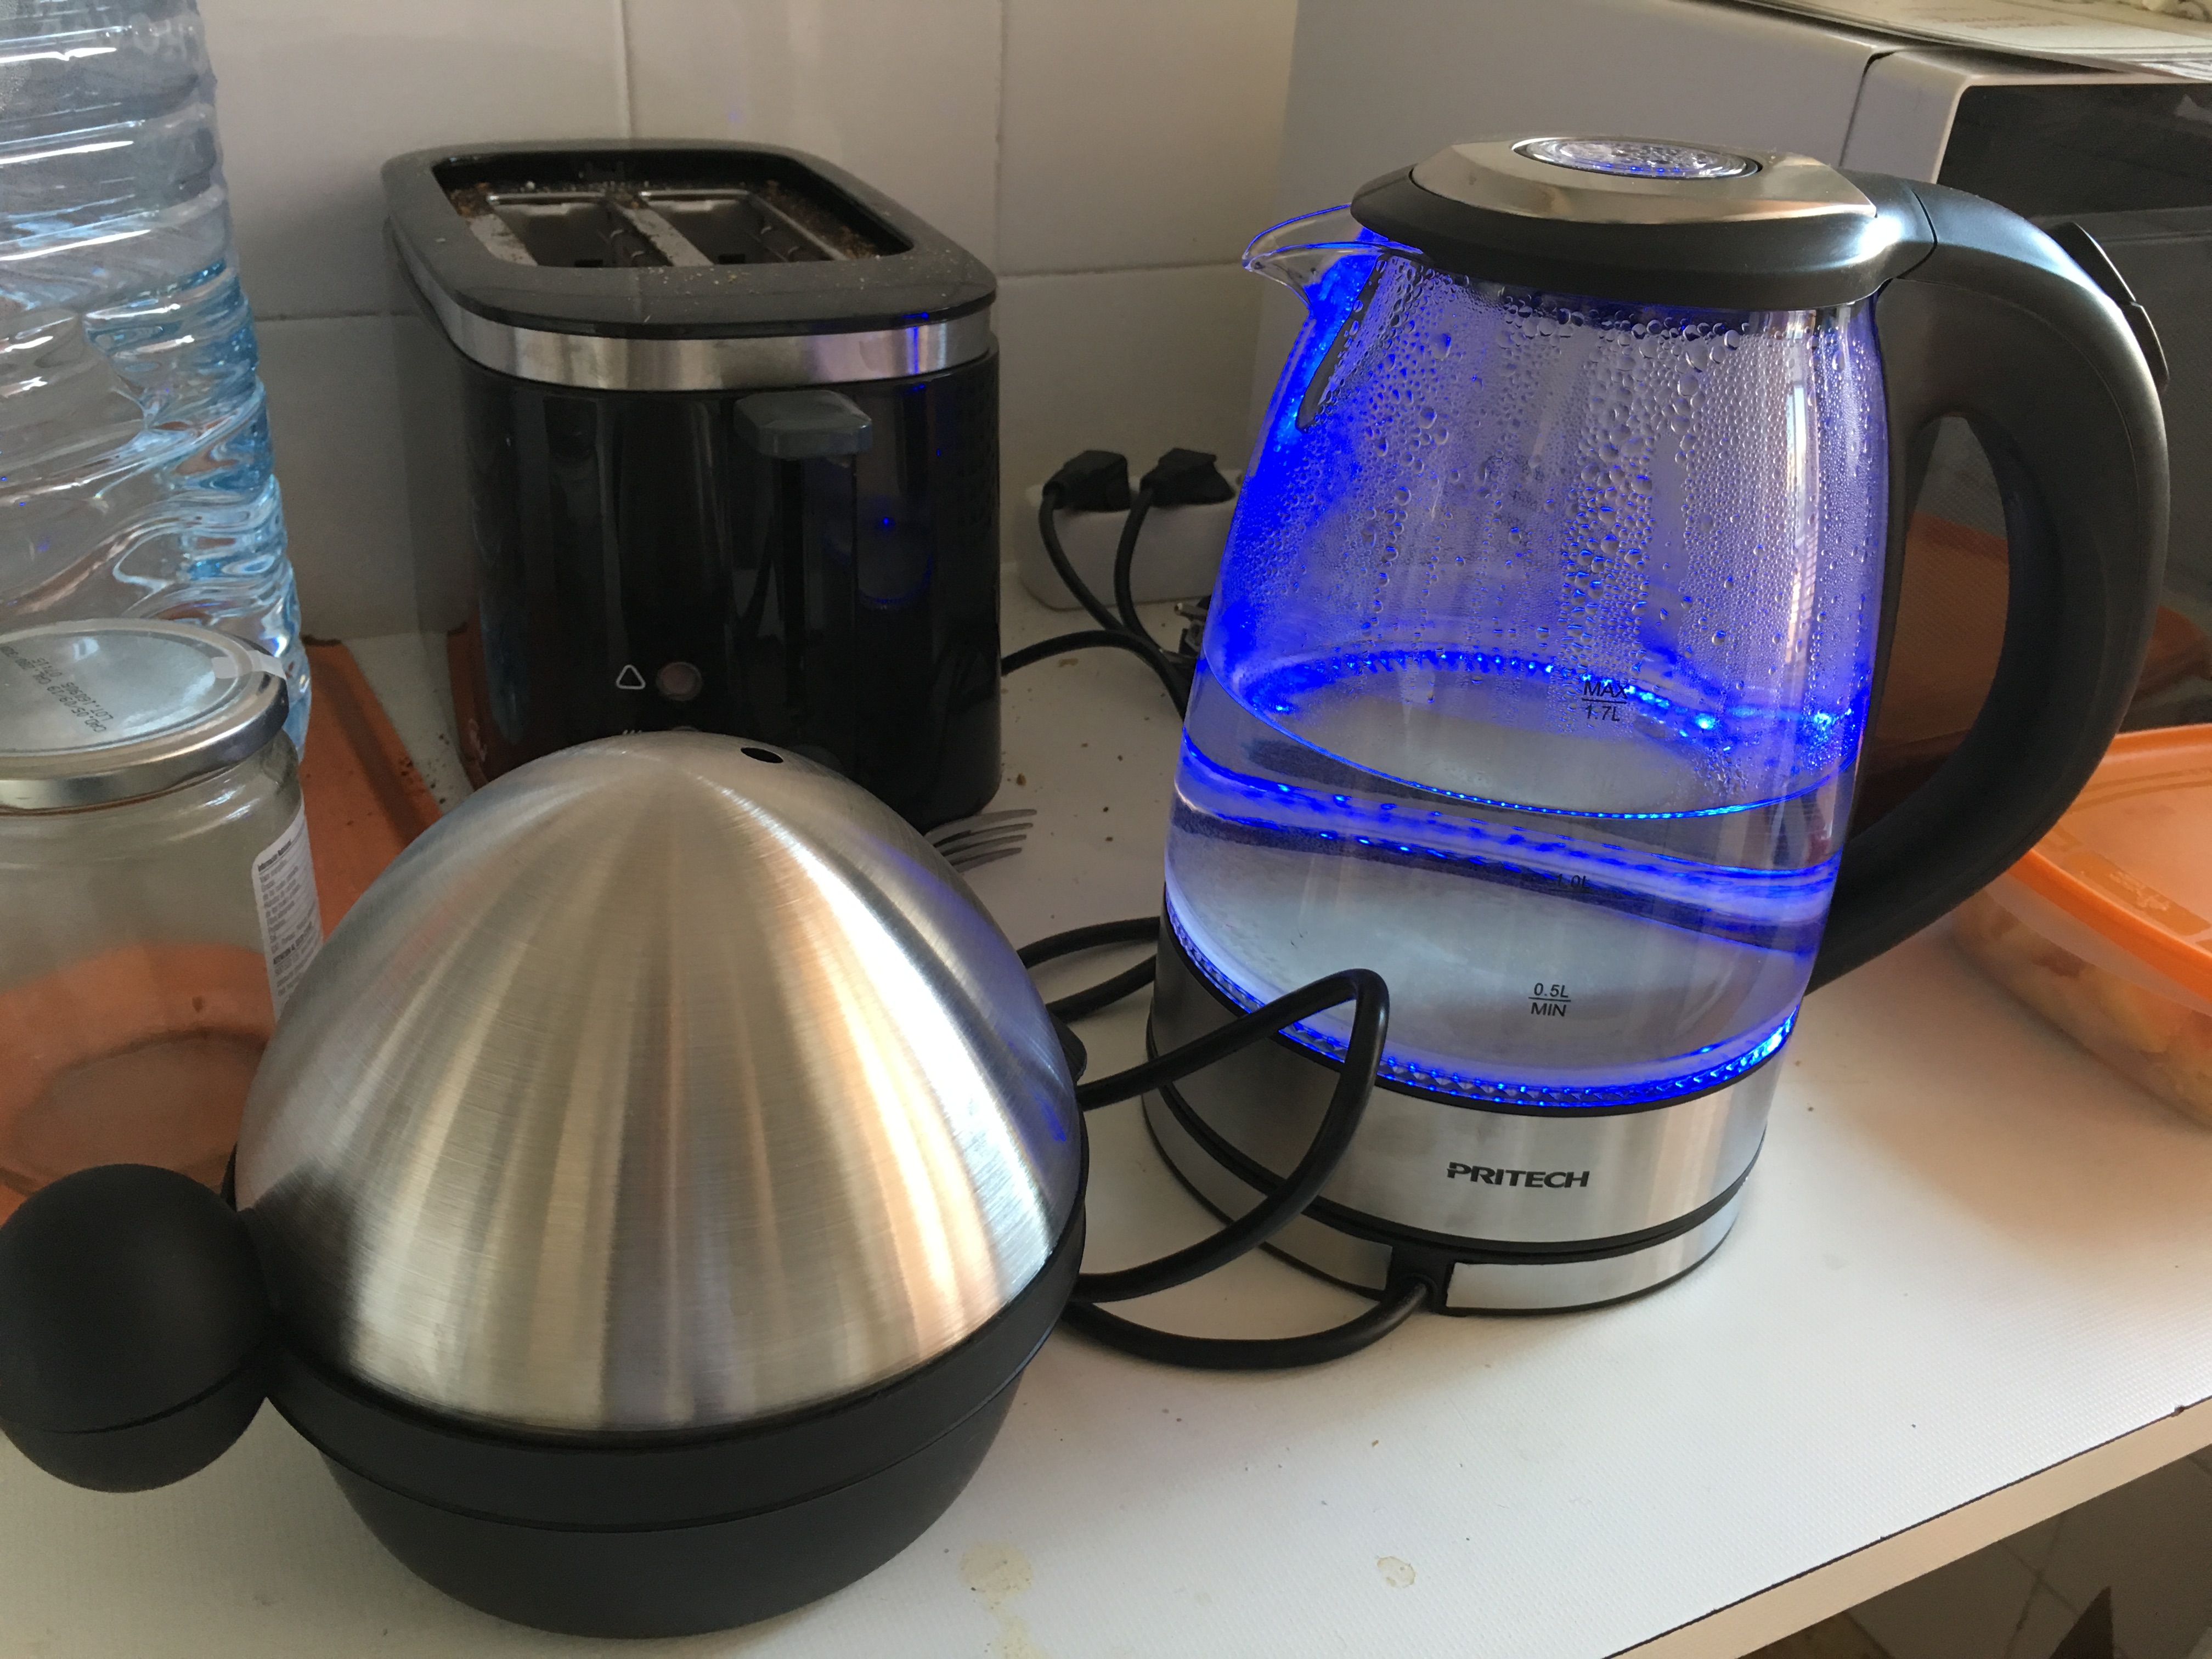 The new water cooker, lit by blue leds